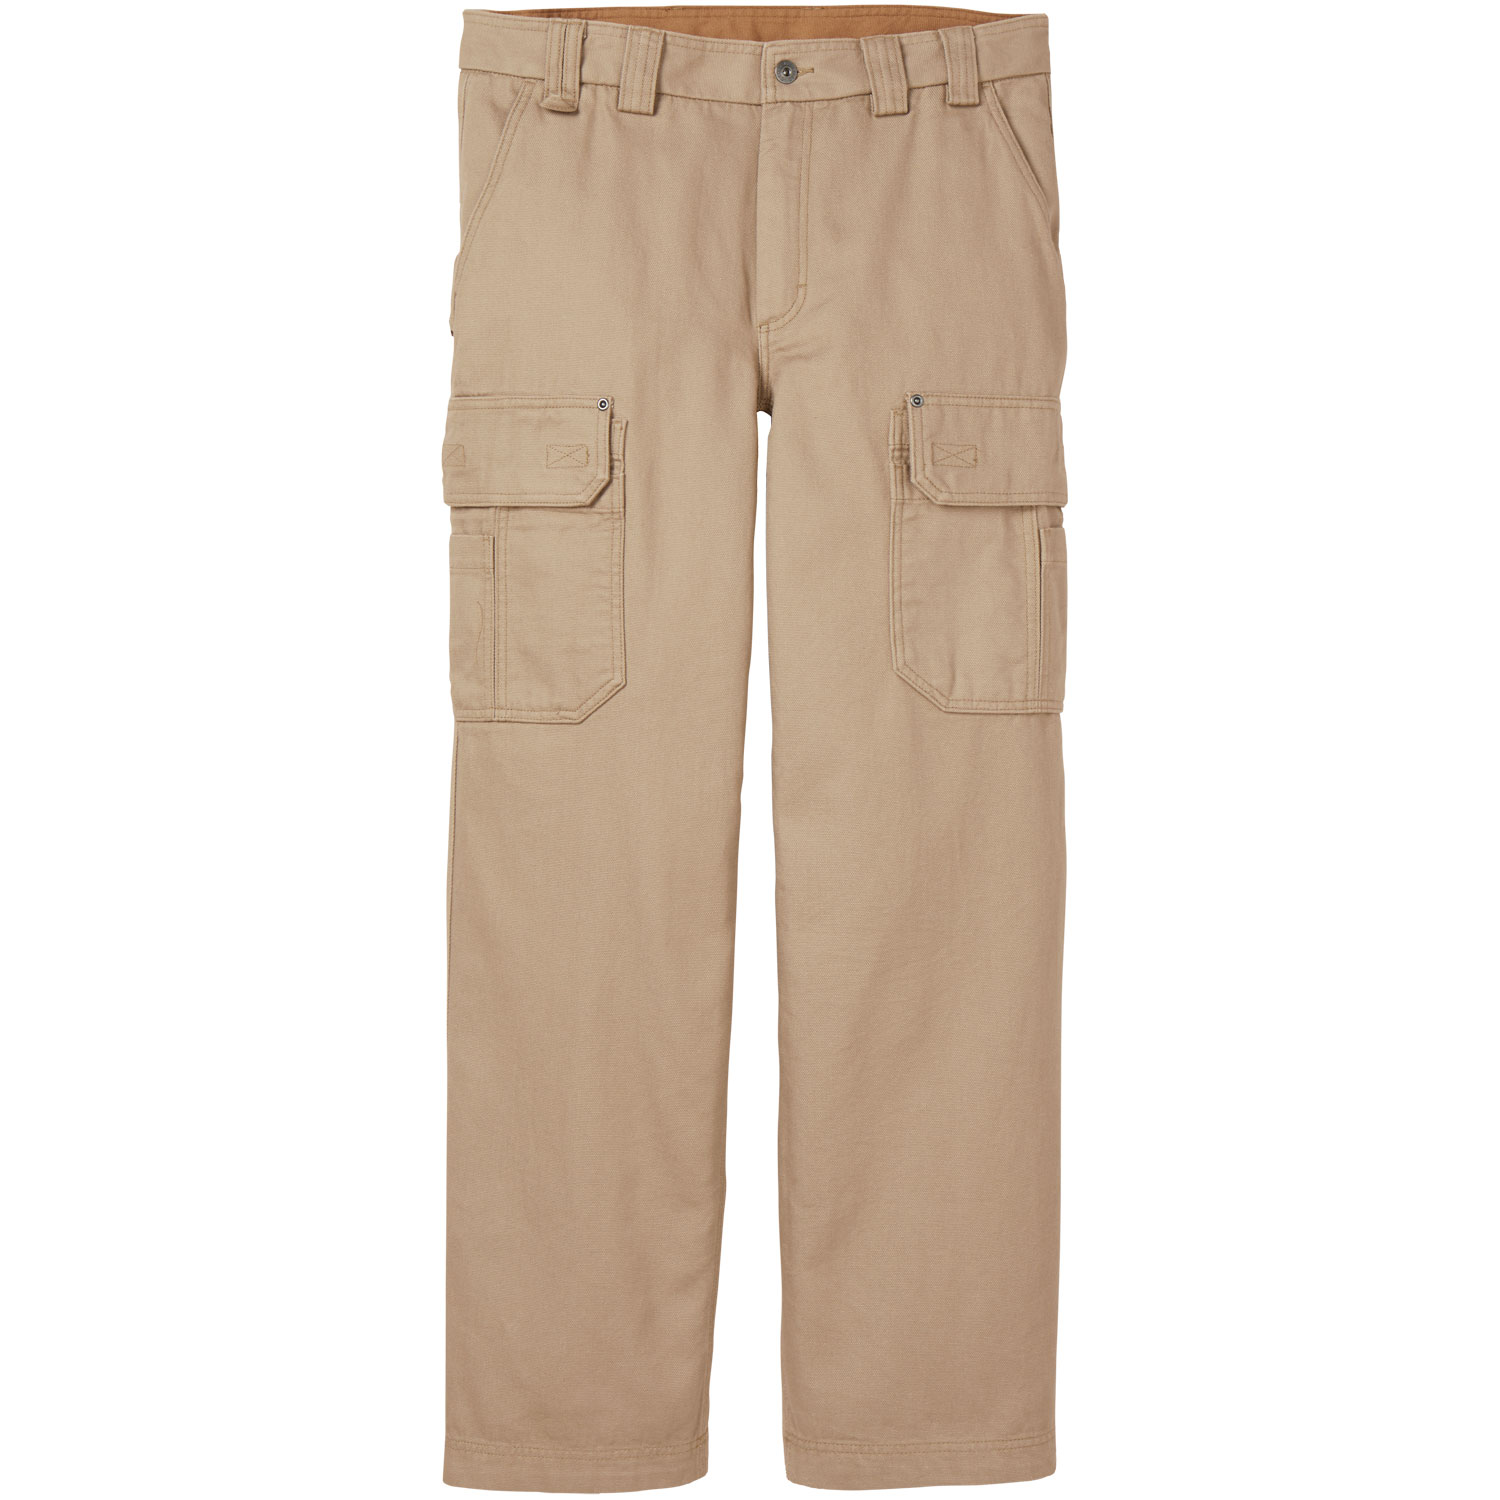 Duluth Trading Co. Fire Hose Work Pants Review - The Gadgeteer